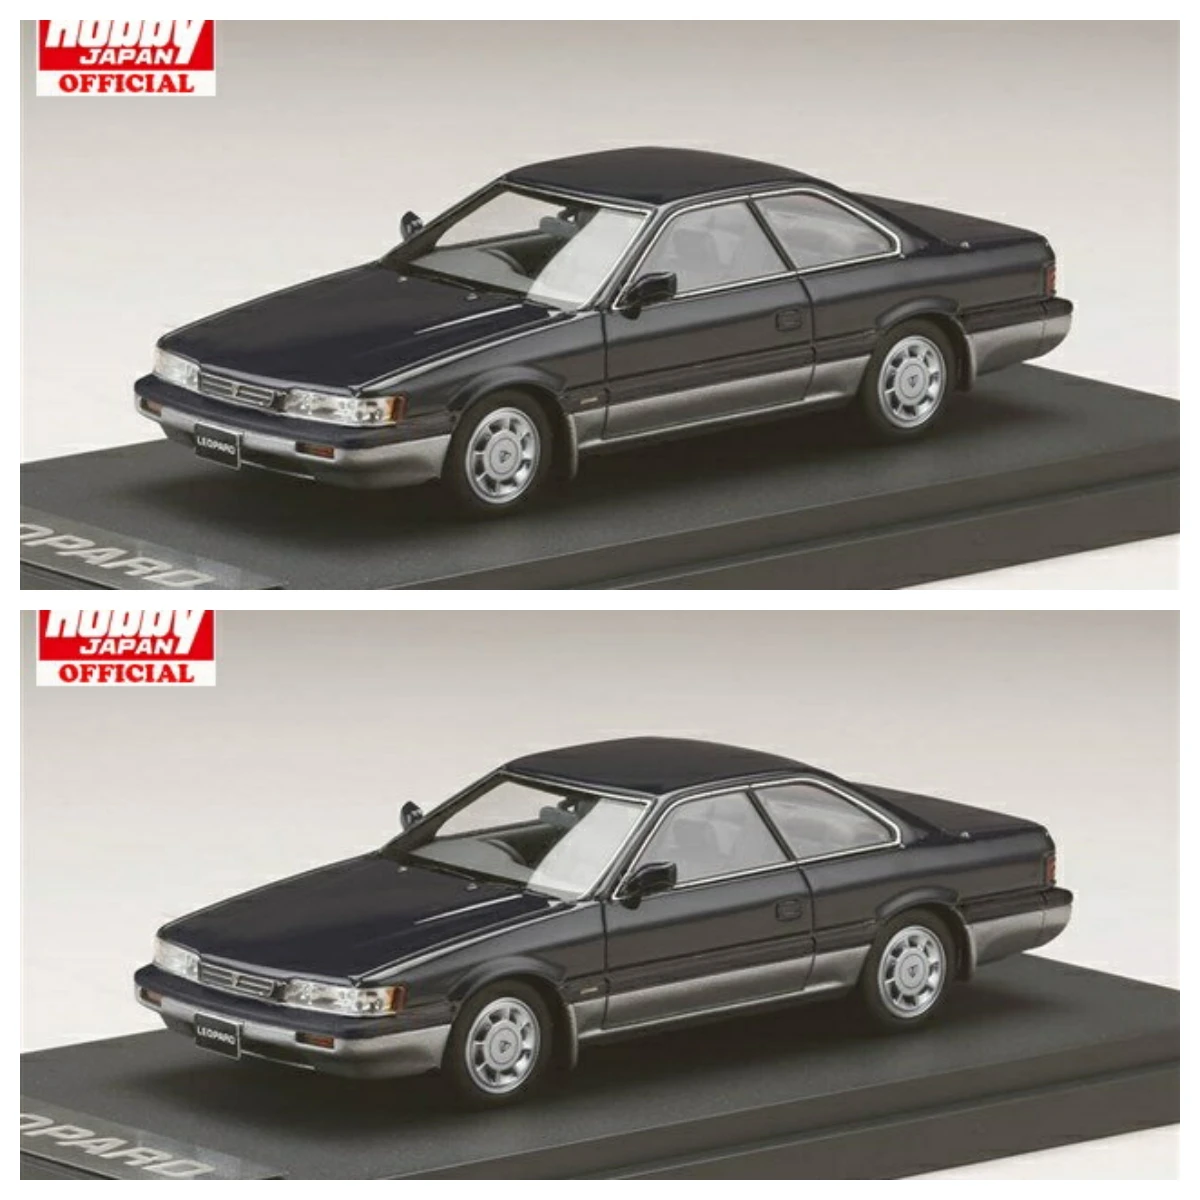 

Mark43 PM4373BL 1/43 Lepard Altima V30 Twin Cam Turbo (1988) Dark Blue Two-tone Resin Model Gift Model Car Collection Limited Ed